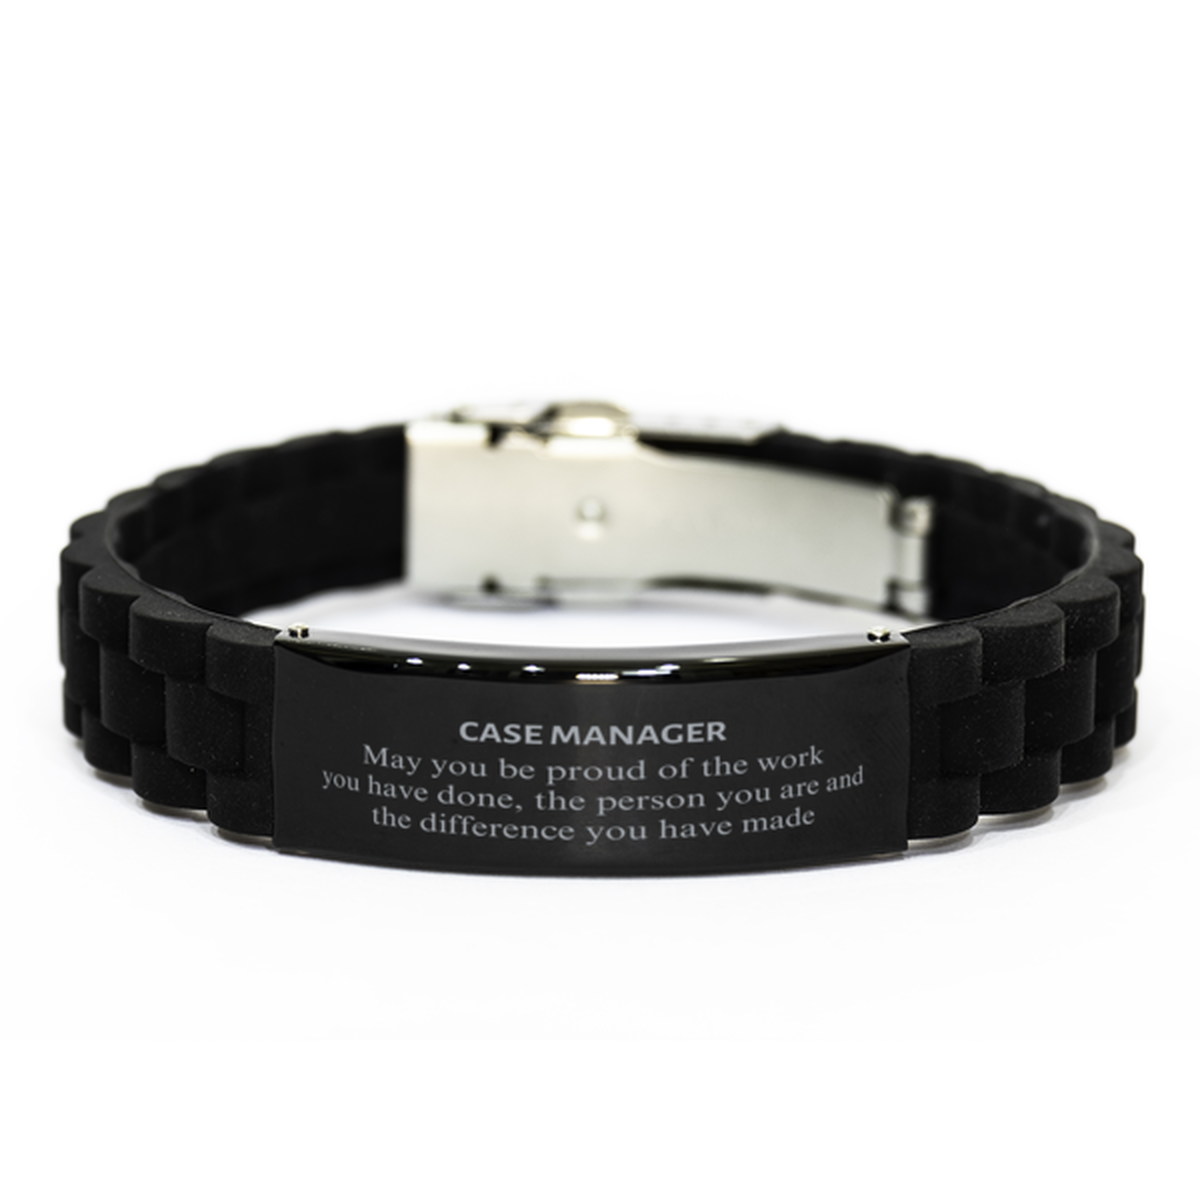 Case Manager May you be proud of the work you have done, Retirement Case Manager Black Glidelock Clasp Bracelet for Colleague Appreciation Gifts Amazing for Case Manager